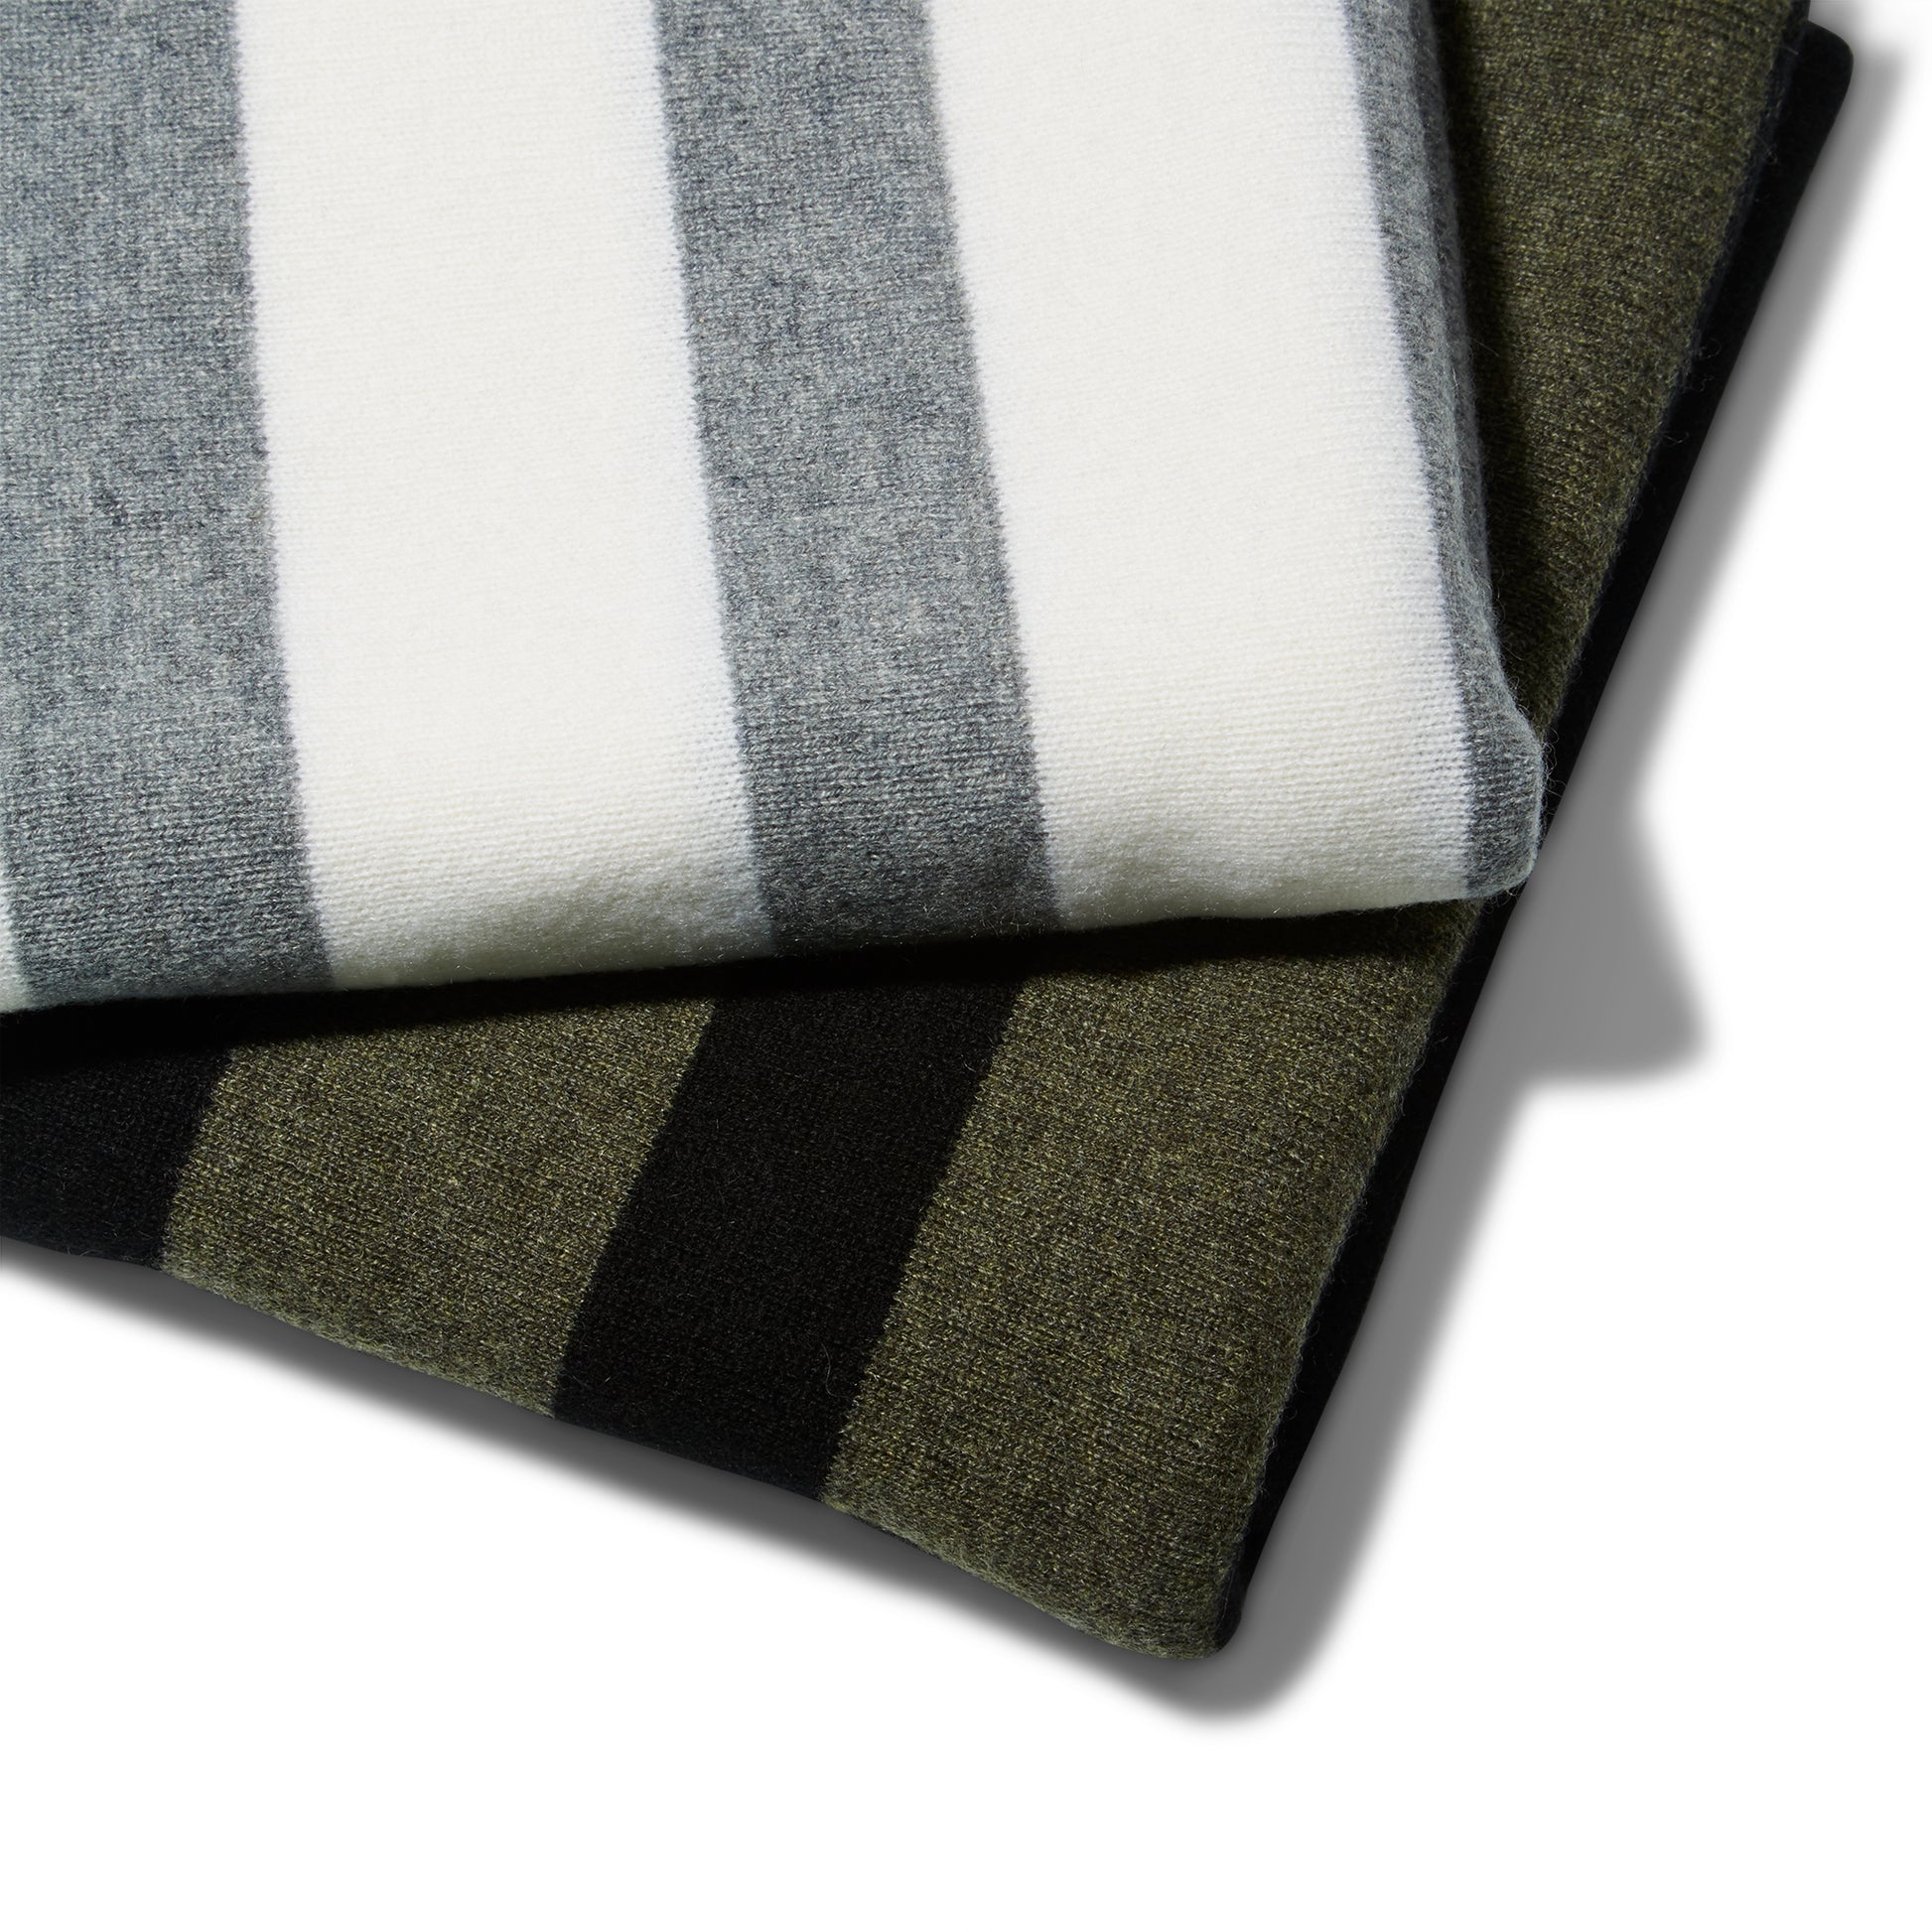 Two Reed Clarke Cashmere Travel blankets. A folded grey blanket with wide white stripes laying partially on top of a black blanket with wide olive green stripes.